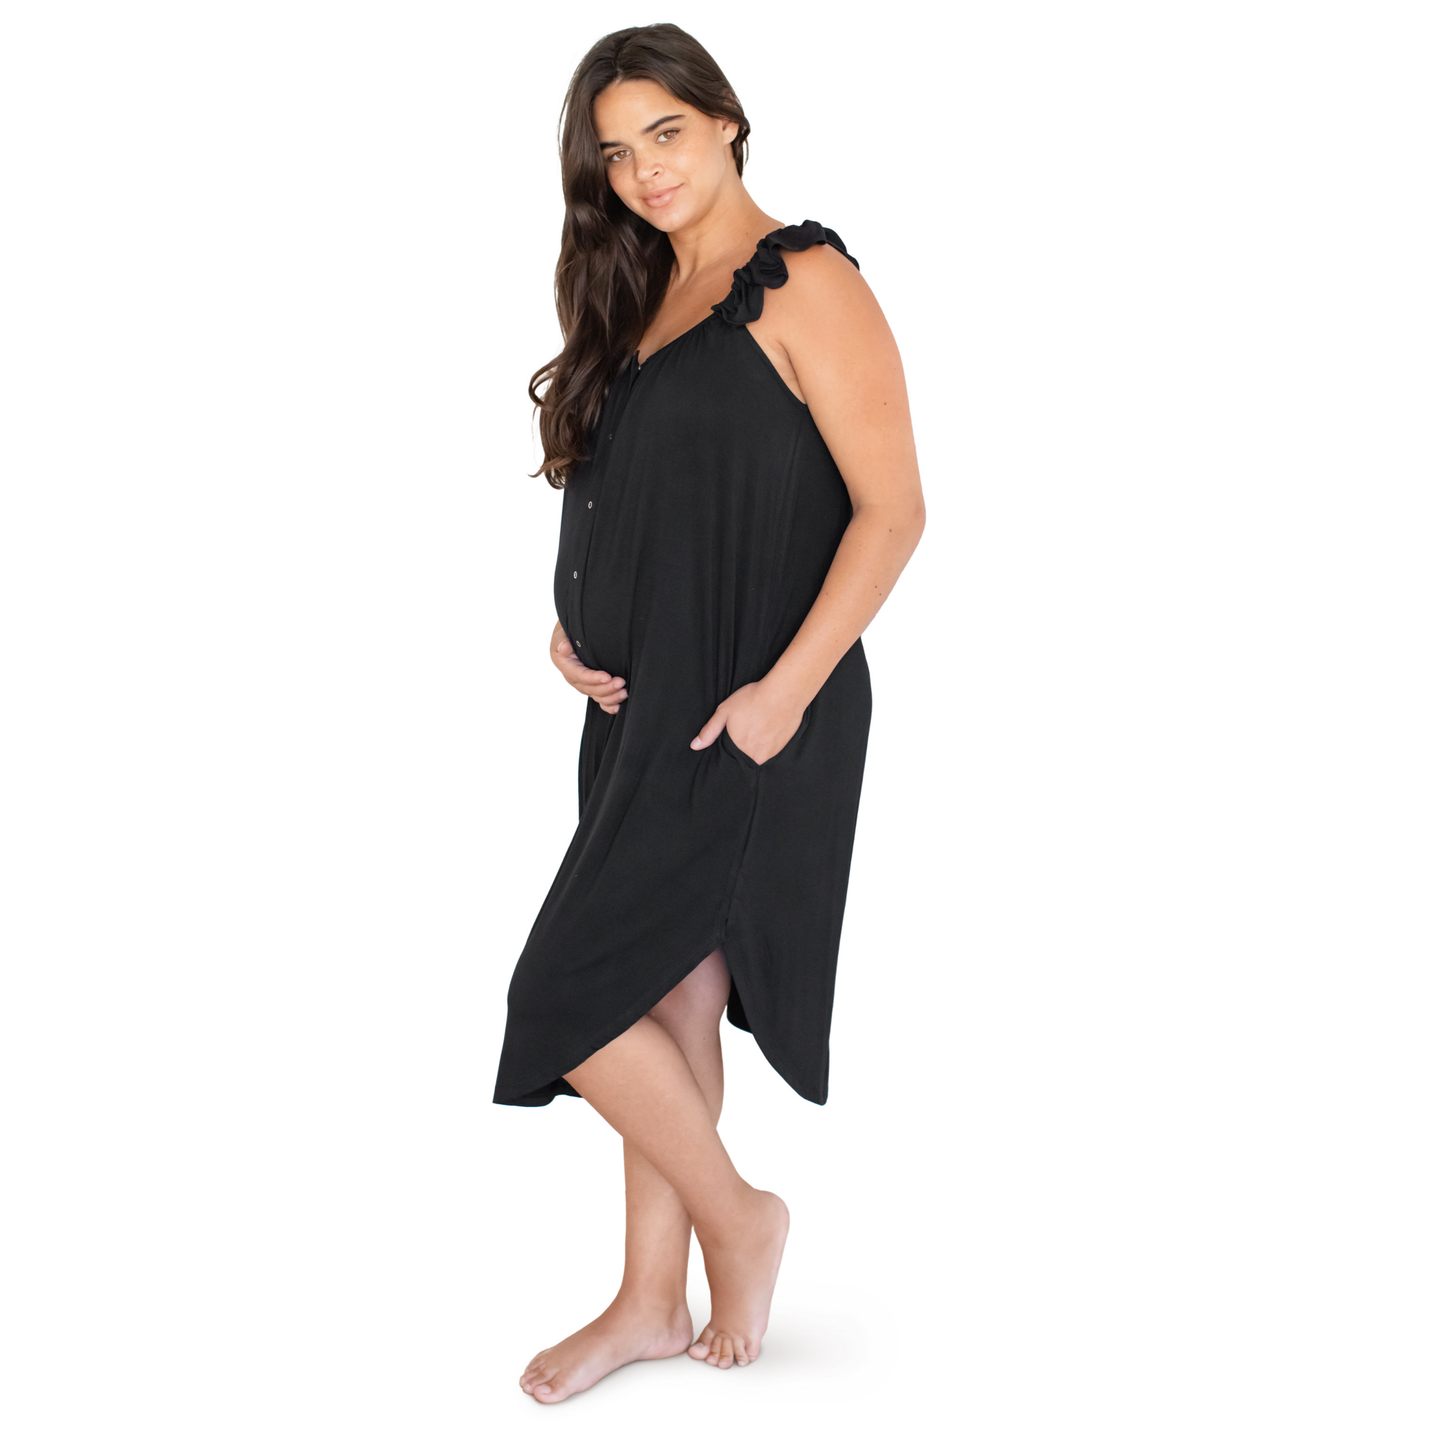 Kindred Bravely - Ruffle Strap Labor & Delivery Gown